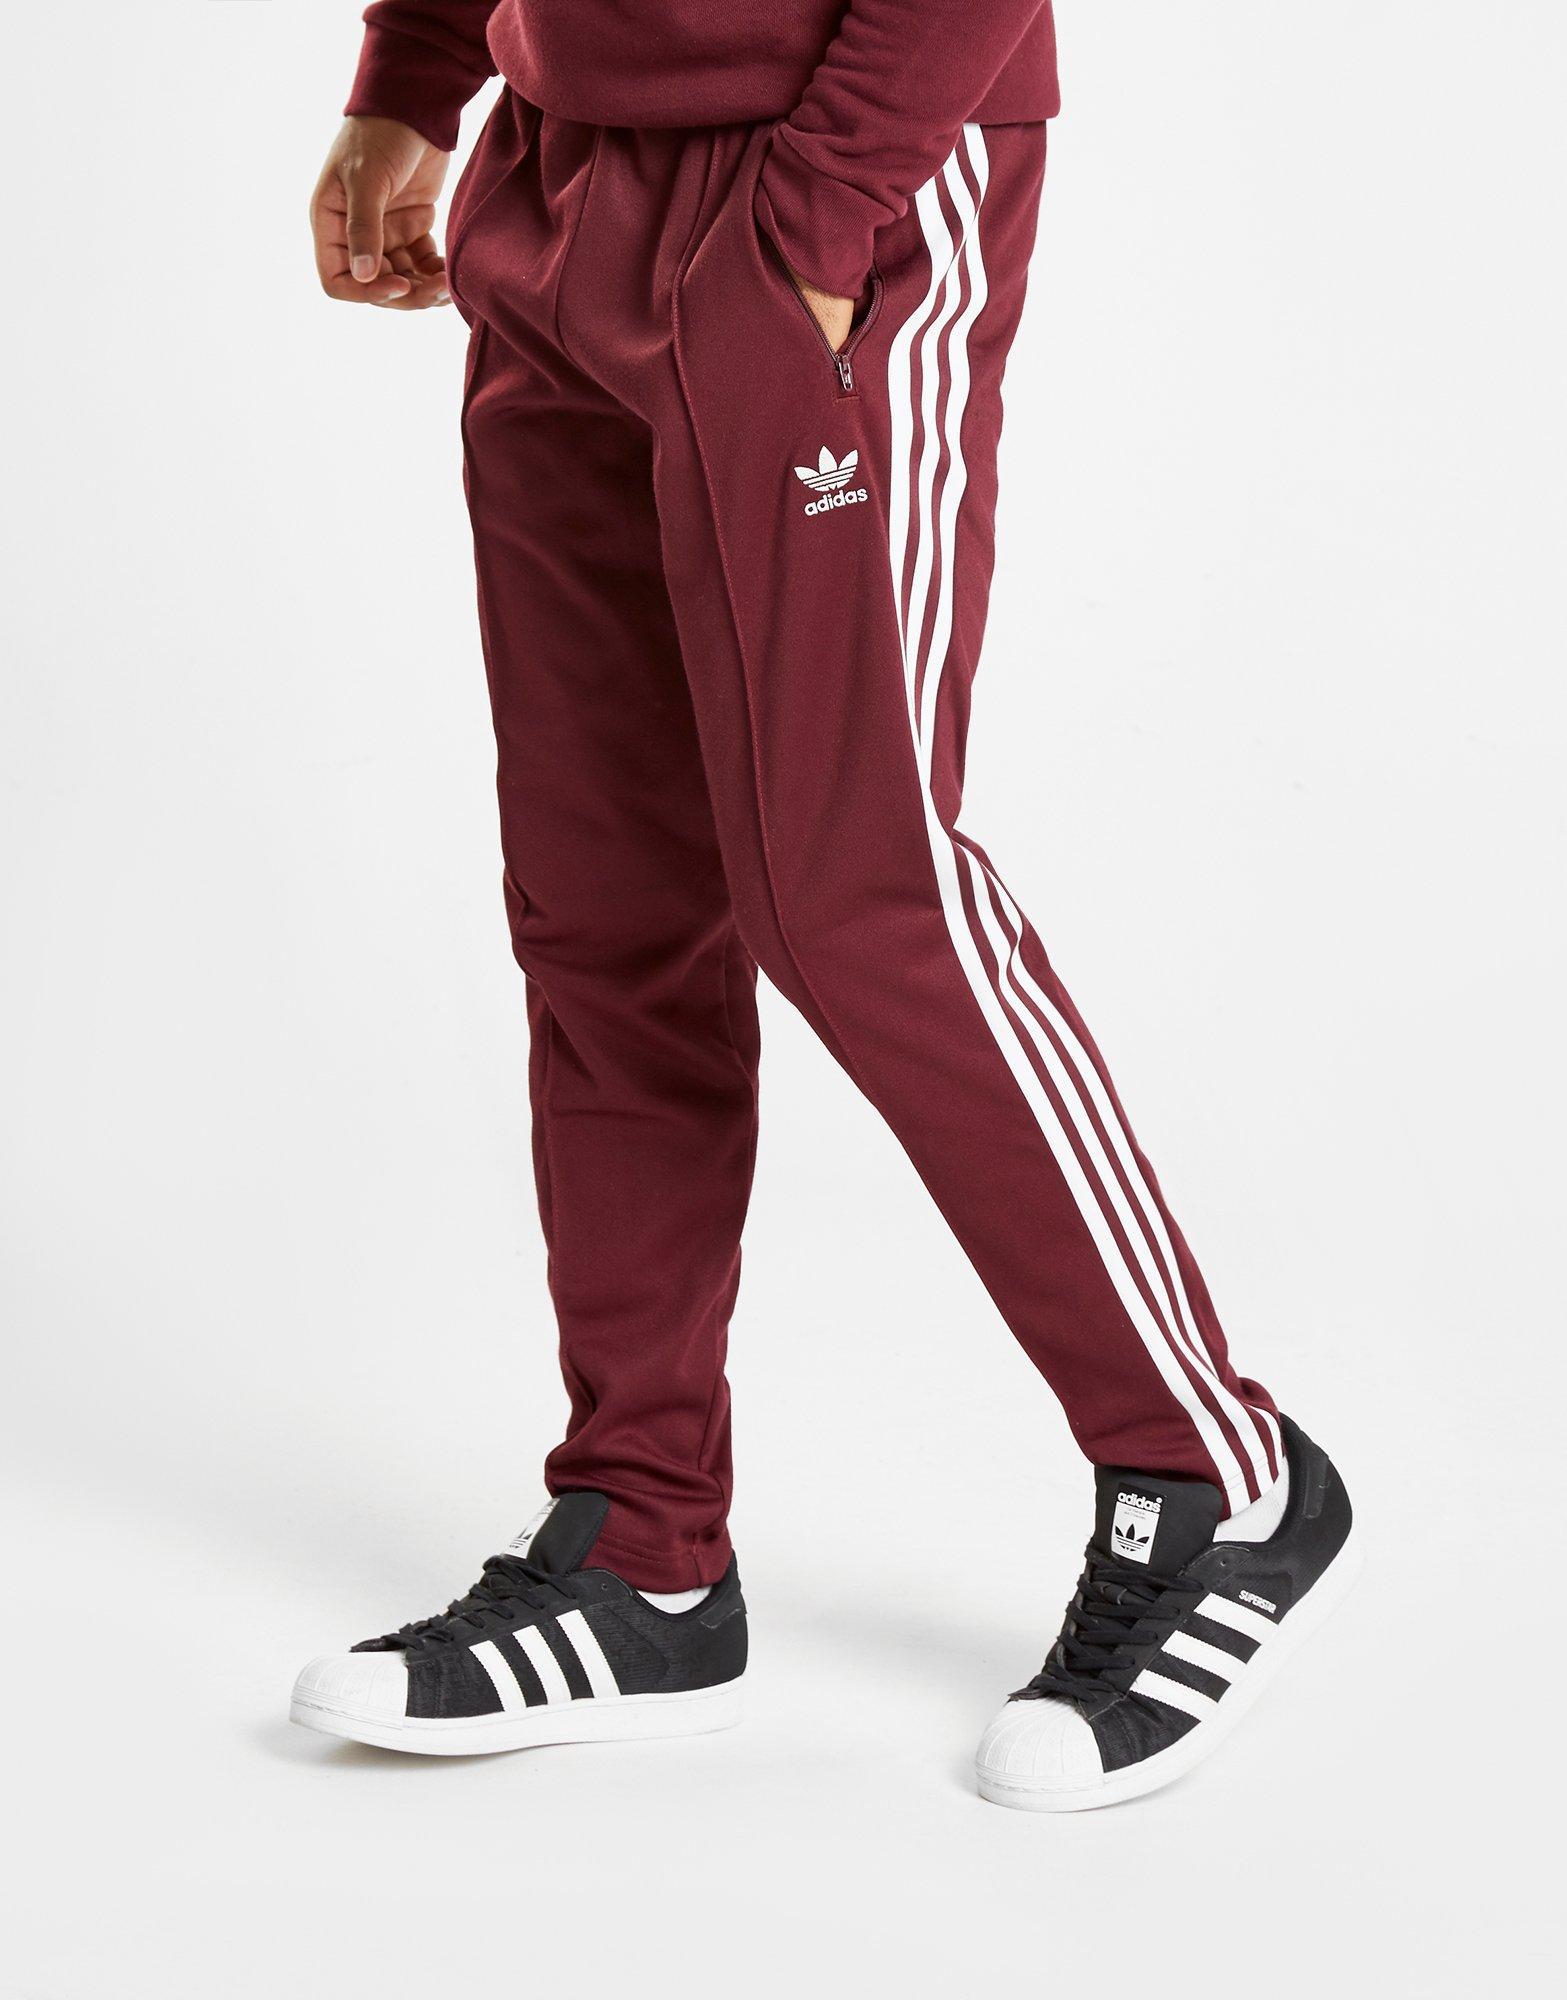 Activewear Bottoms Adidas Originals Europe Tp " Beckenbauer Tracksuit  Bottoms Sports Pants Red Clothes, Shoes & Accessories esjay.org